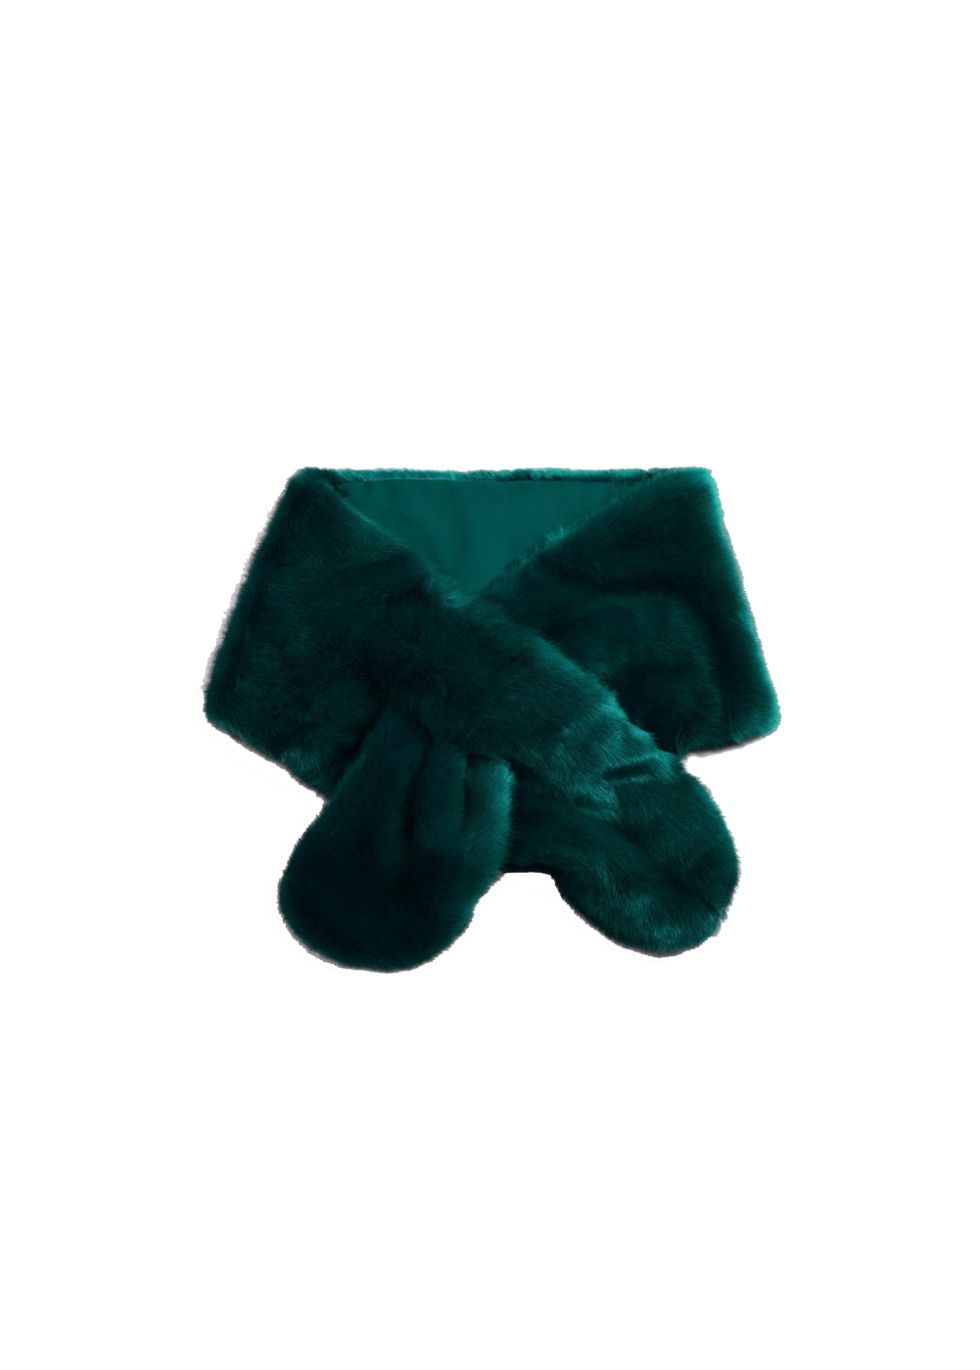 Green, Turquoise, Teal, Fur, Footwear, Fashion accessory, Bow tie, Turquoise, 